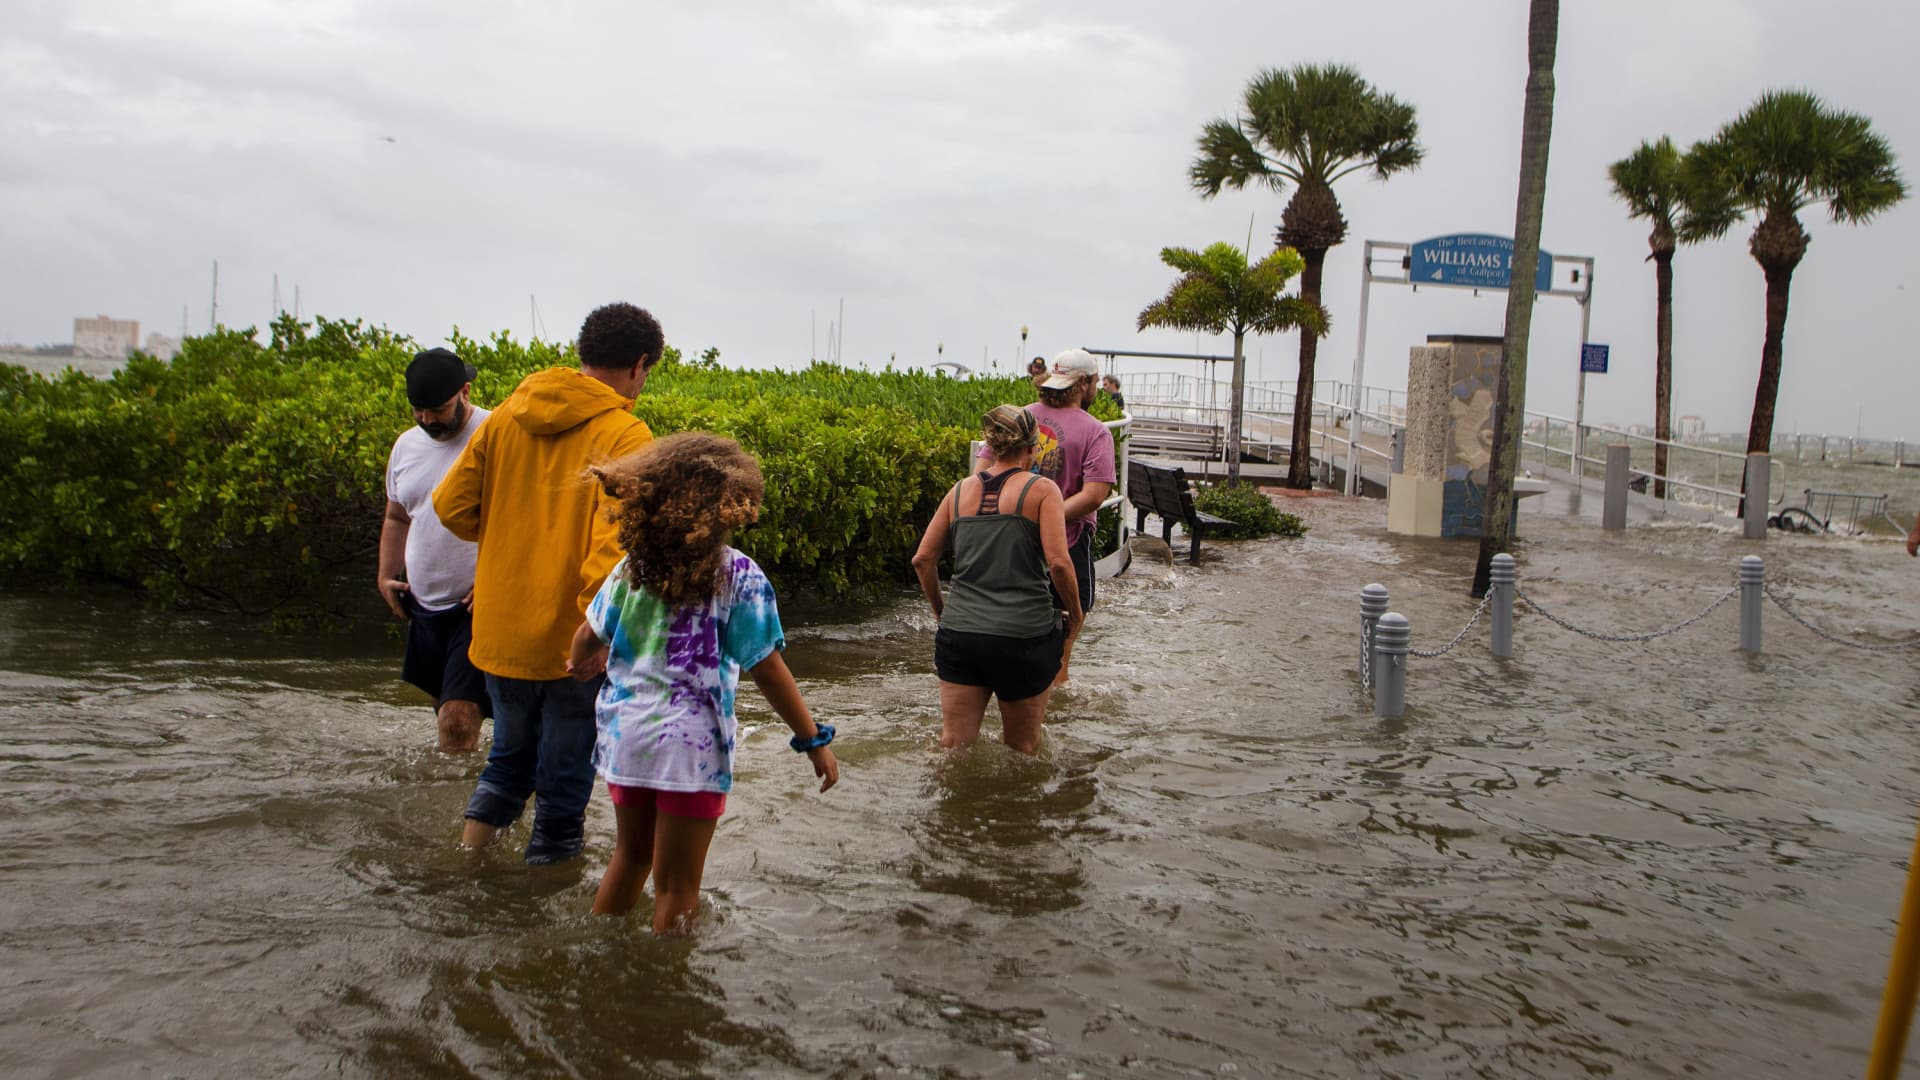 Residents walk through floodwaters from Hurricane Idalia in Gulfport, Florida, on Wednesday, Aug. 30, 2023.